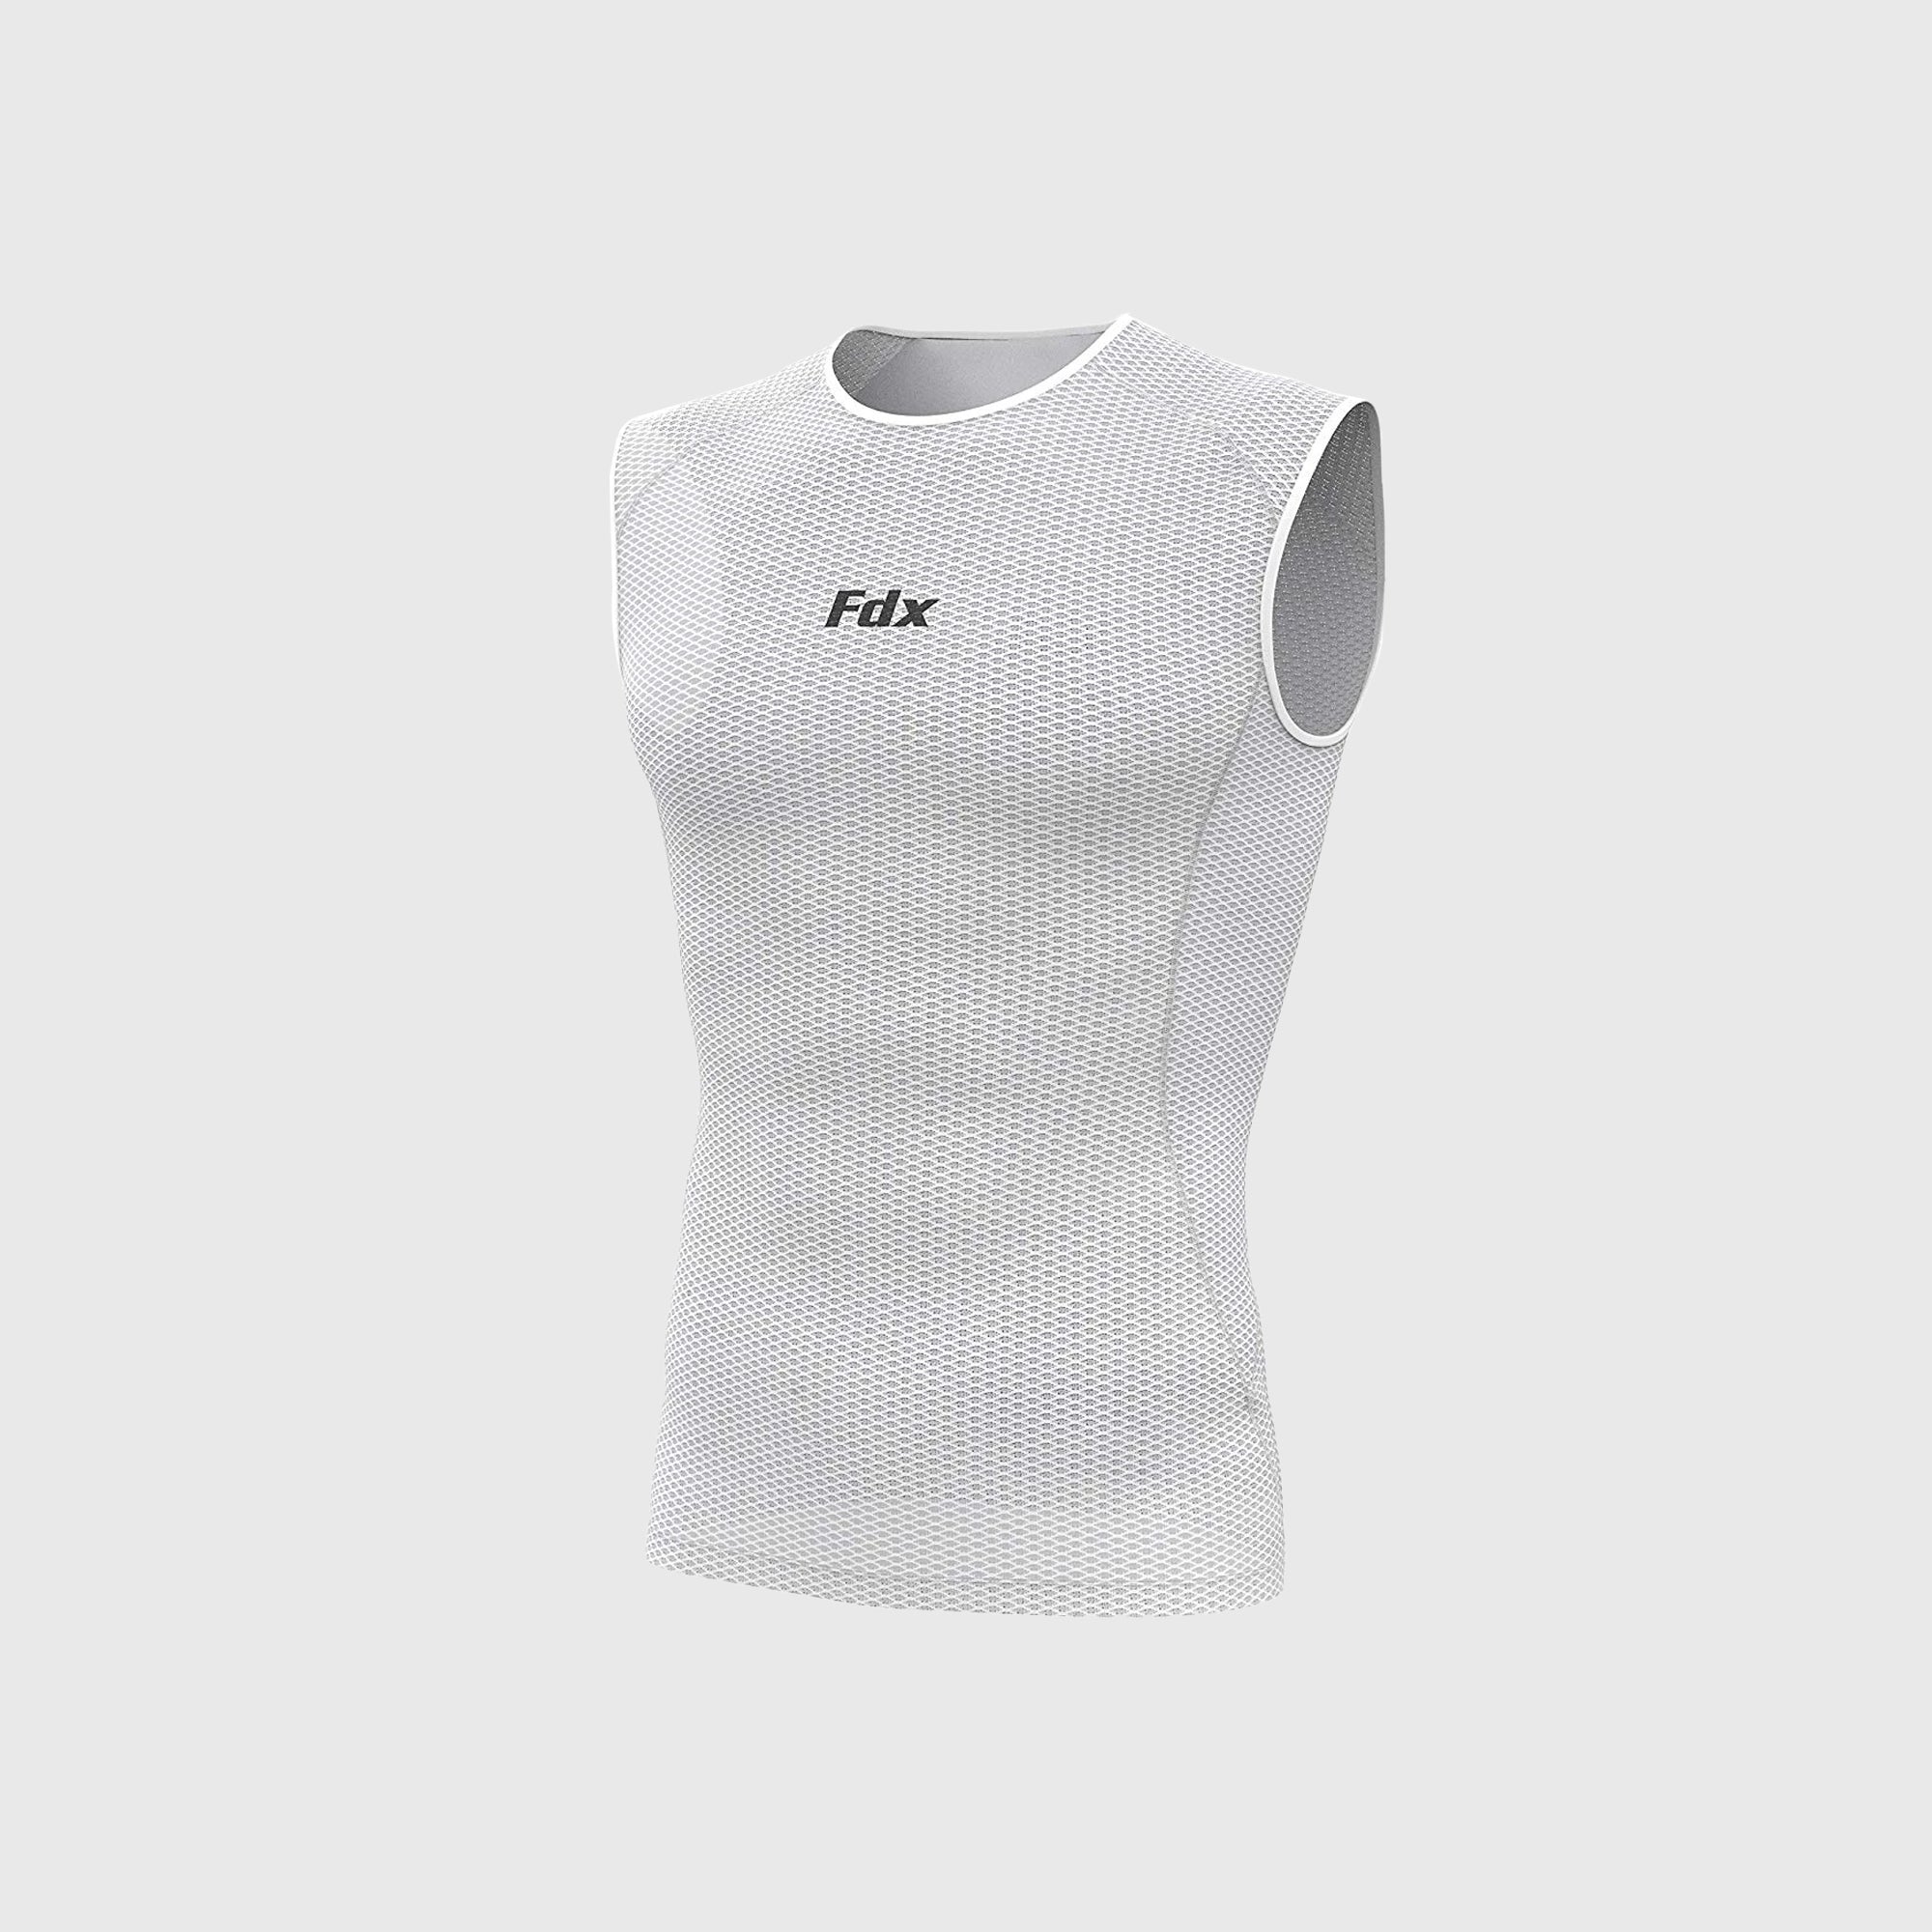 Fdx Mens White Sleeveless Mesh Compression Top Running Gym Workout Wear Rash Guard Stretchable Breathable - Aeroform